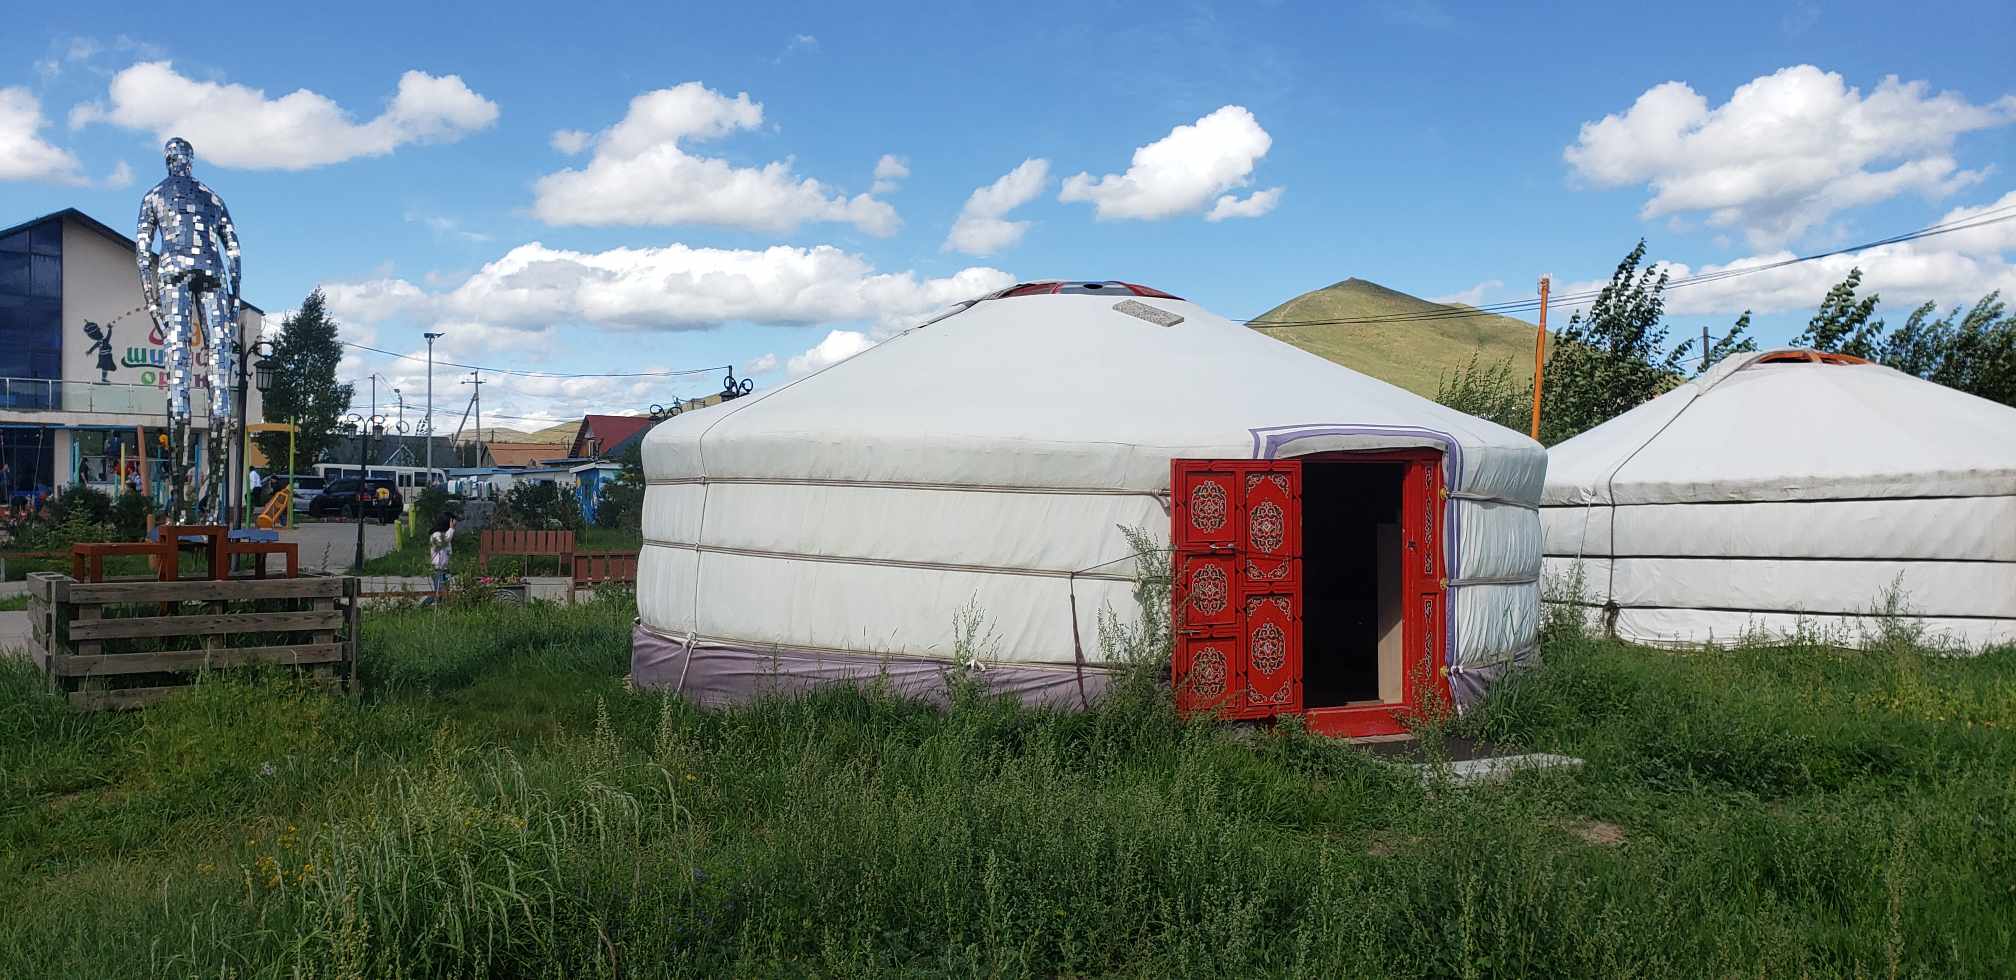 OPEN CALL FOR MONGOLIAN AND MONGOLIA BASED ARTISTS